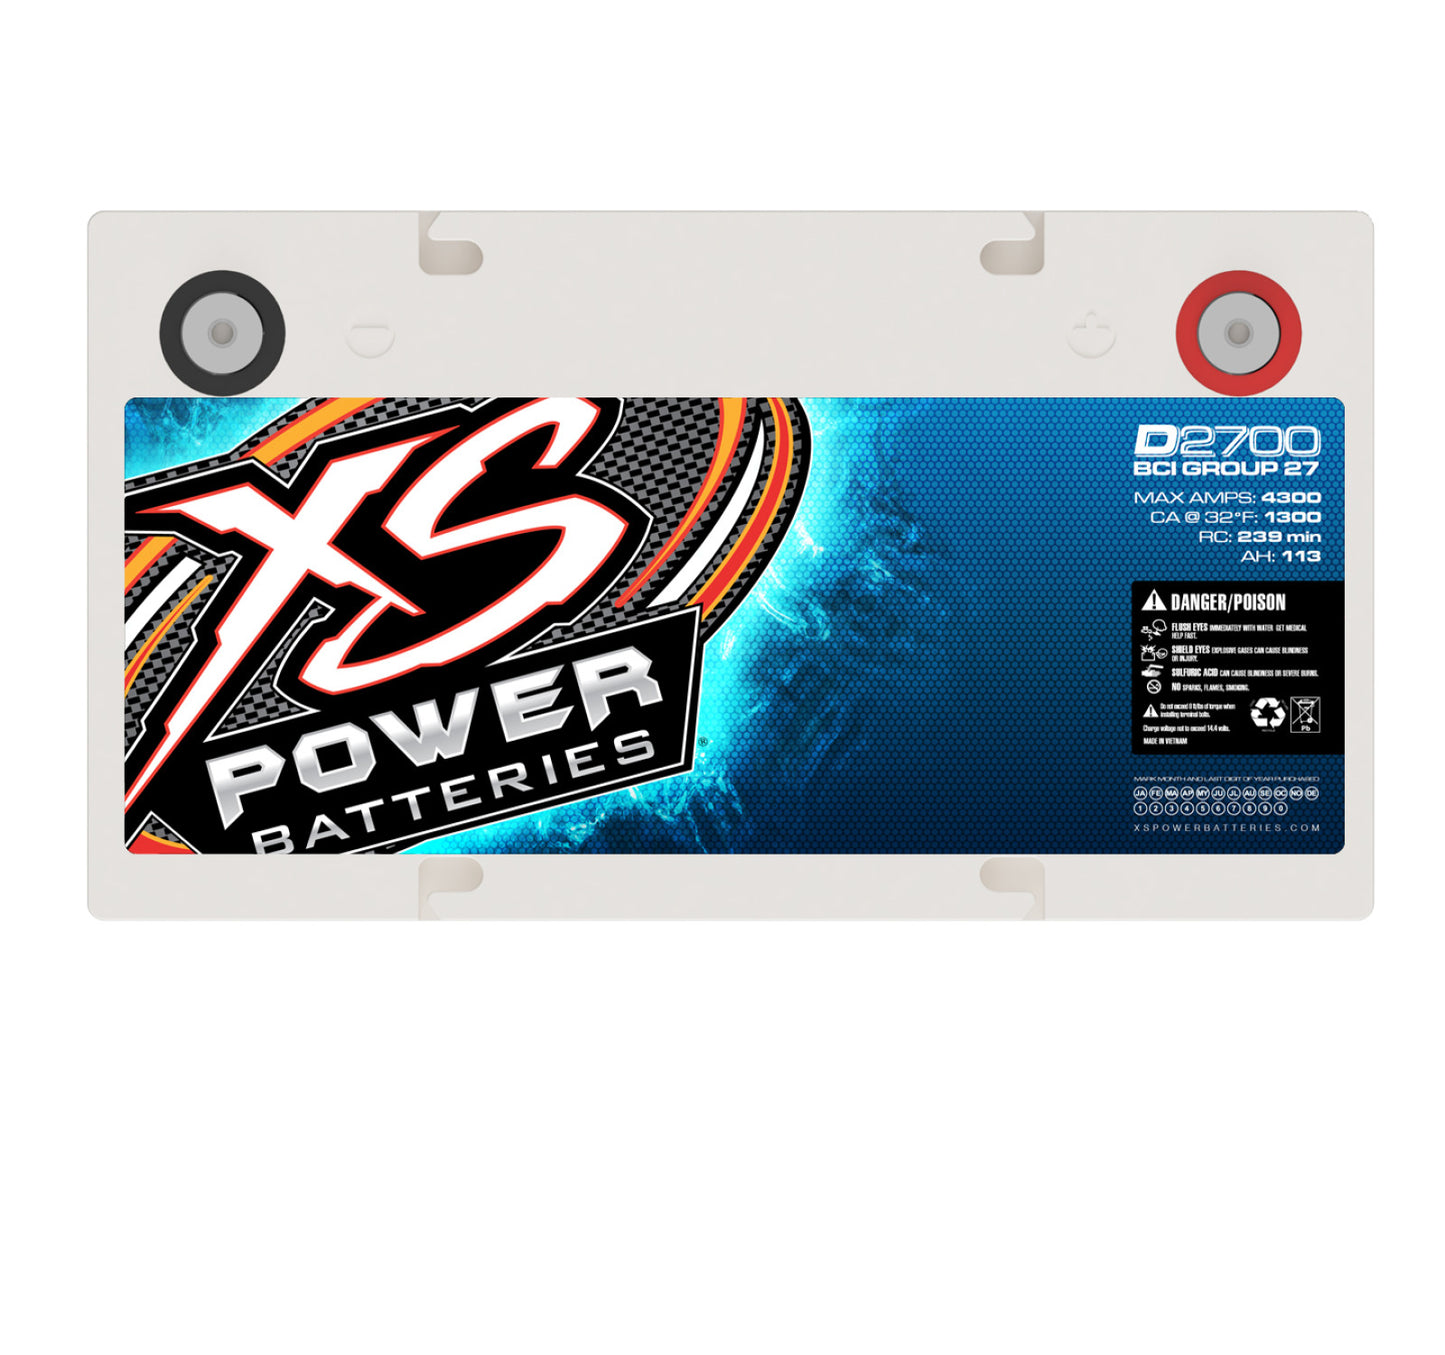 XS Power Batteries 12V AGM D Series Batteries - M6 Terminal Bolts Included 4300 Max Amps D2700